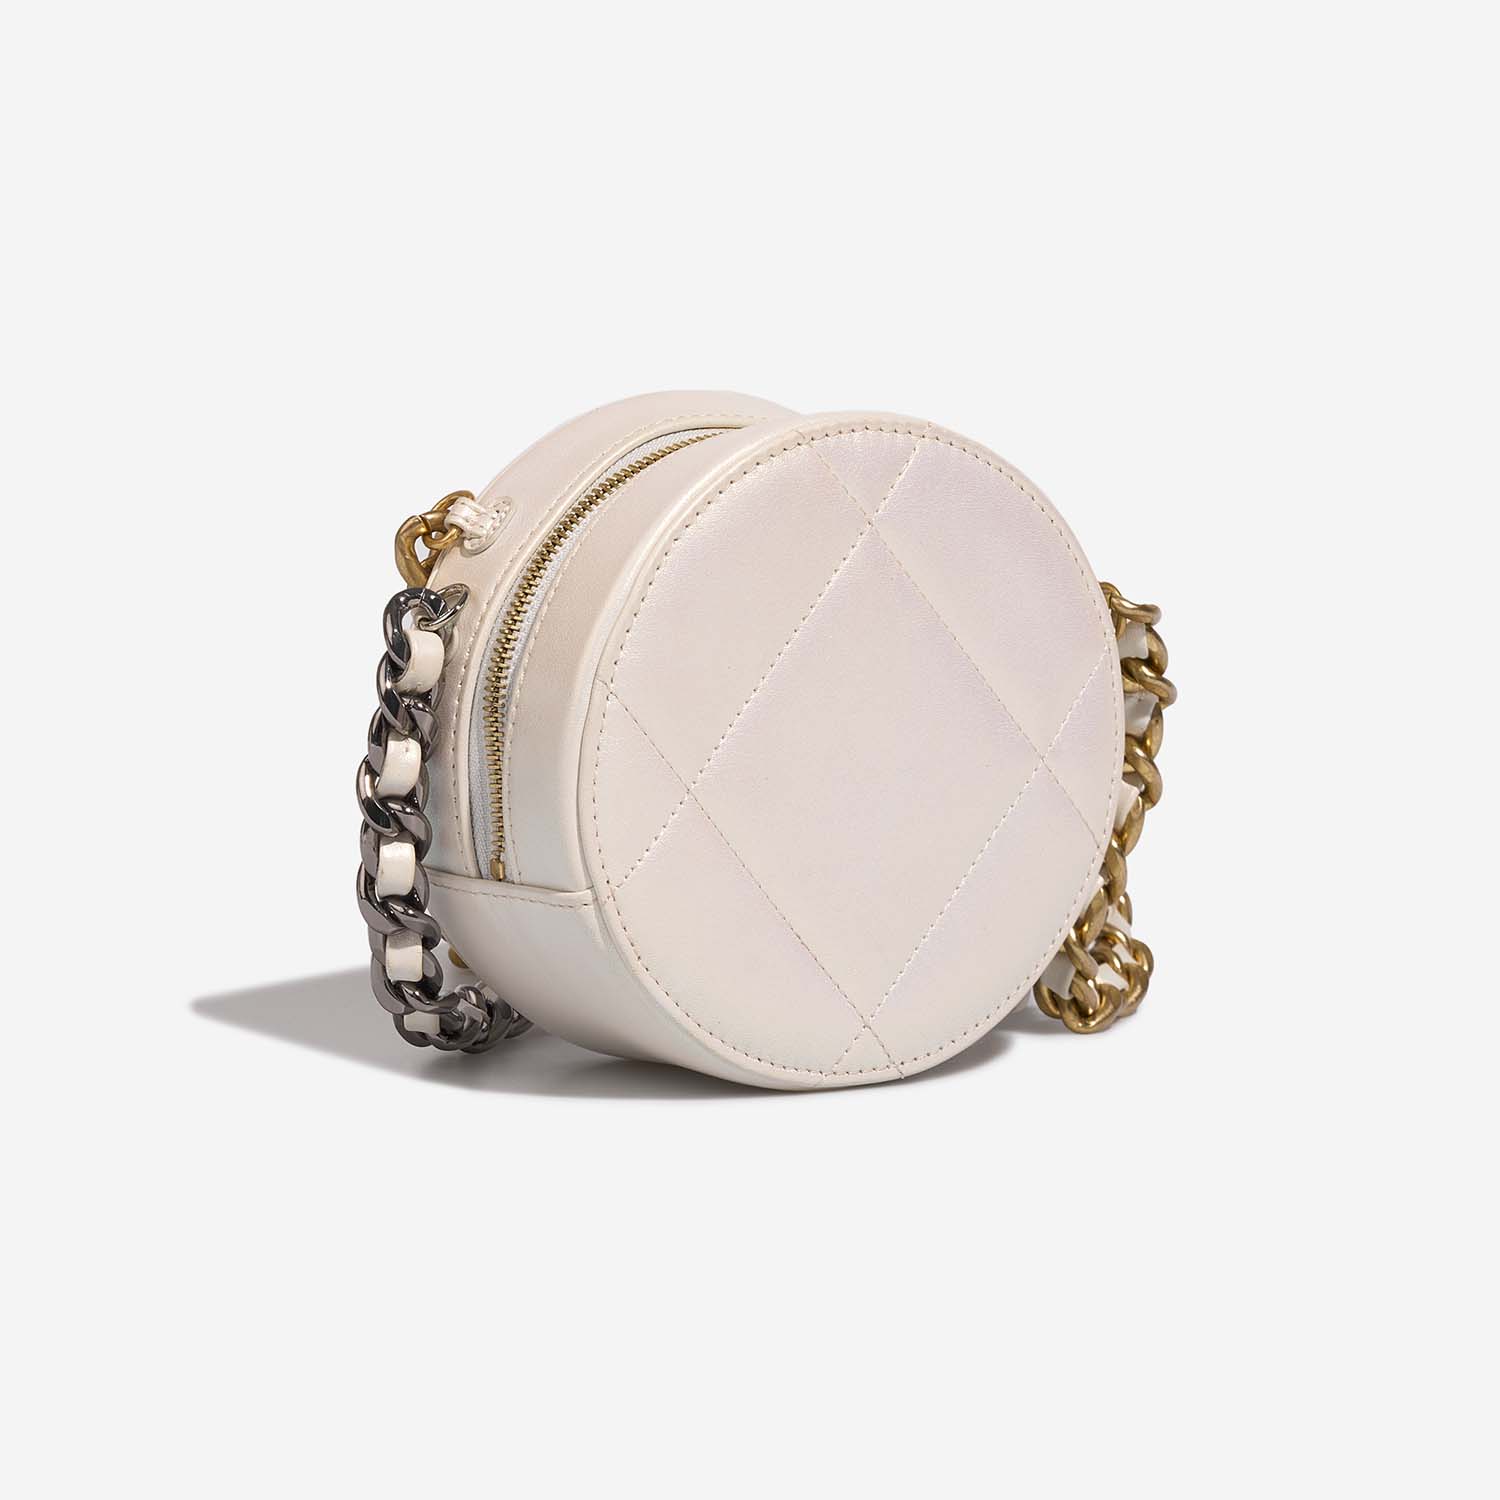 Chanel 19 RoundClutch PearlWhite 7SB S | Sell your designer bag on Saclab.com